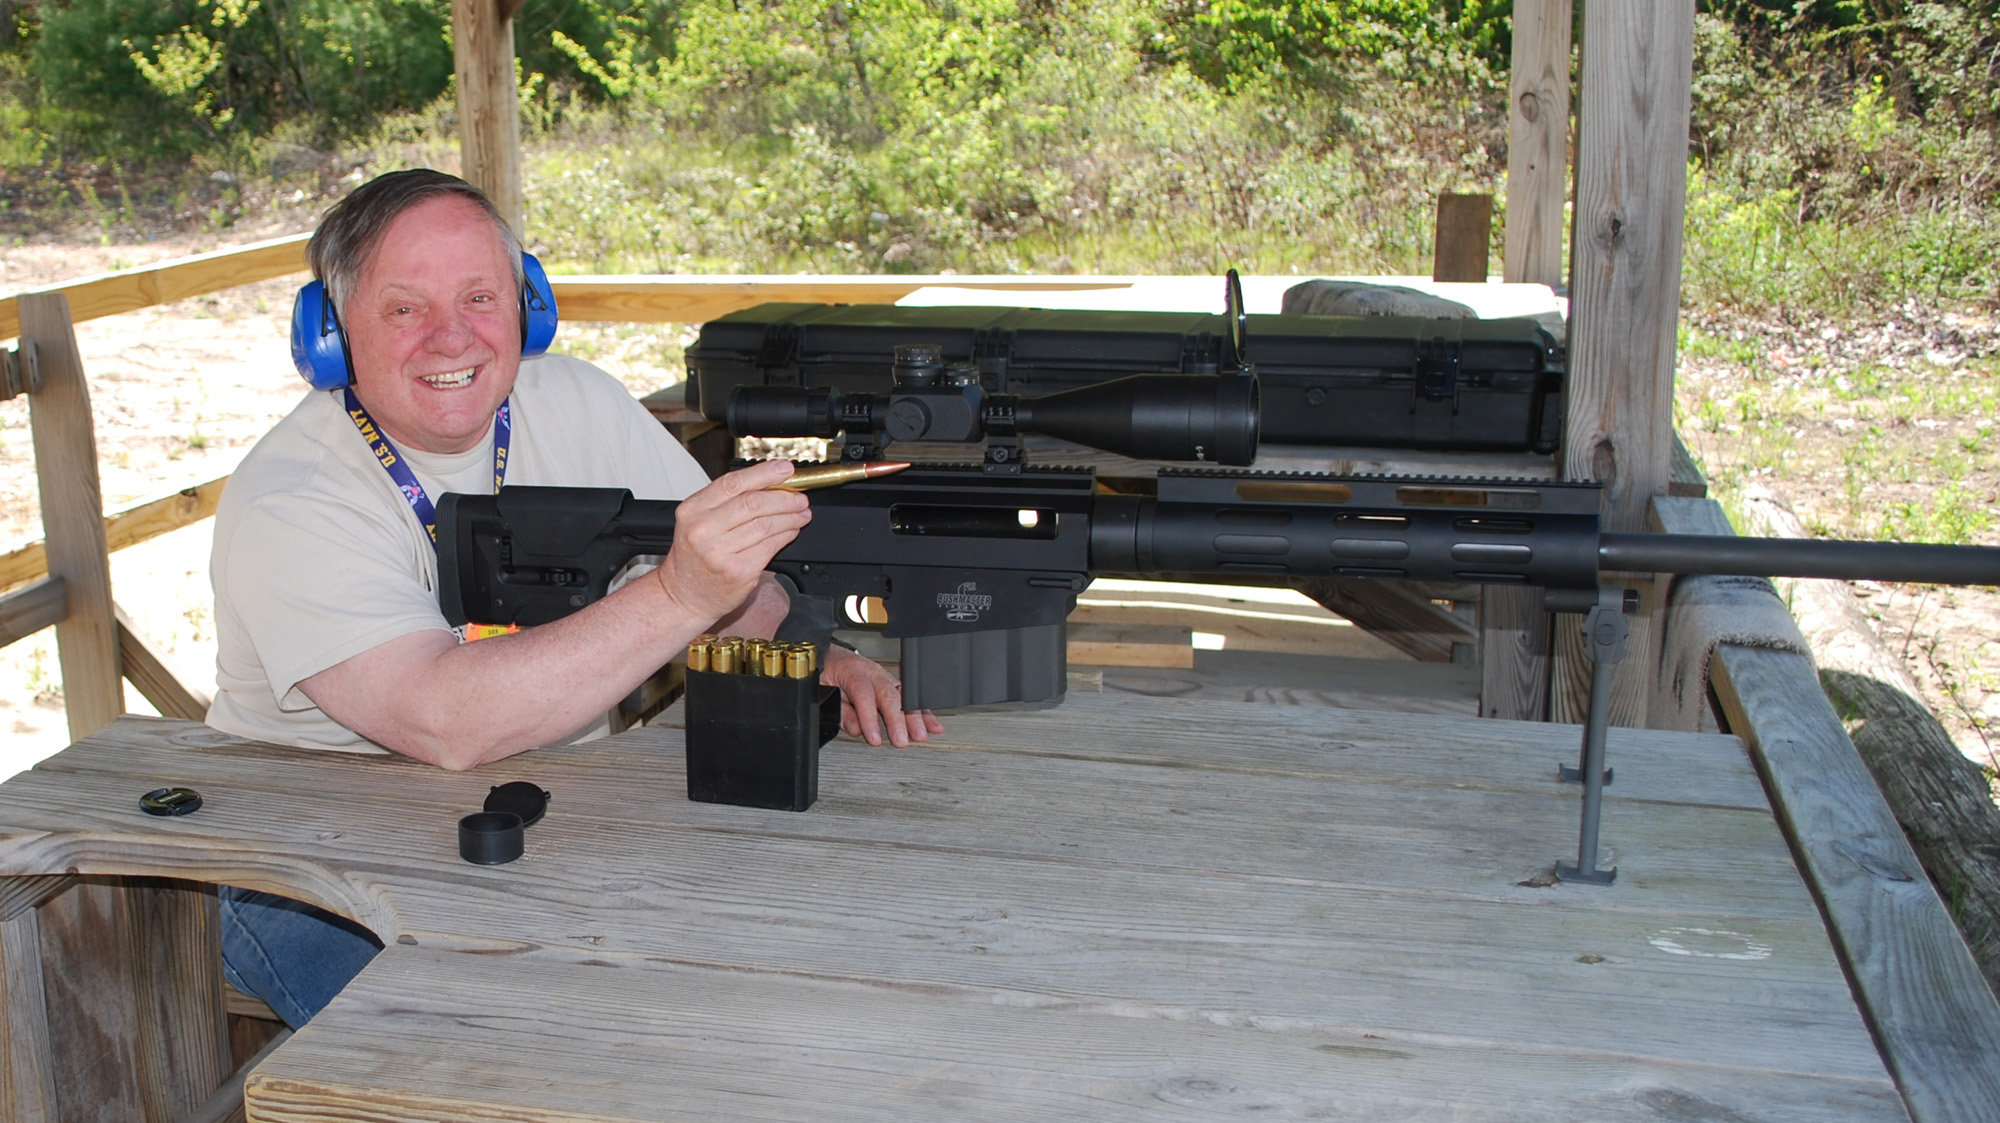 The Bushmaster BA 50 at a 150 yard Range - With Video Updated.